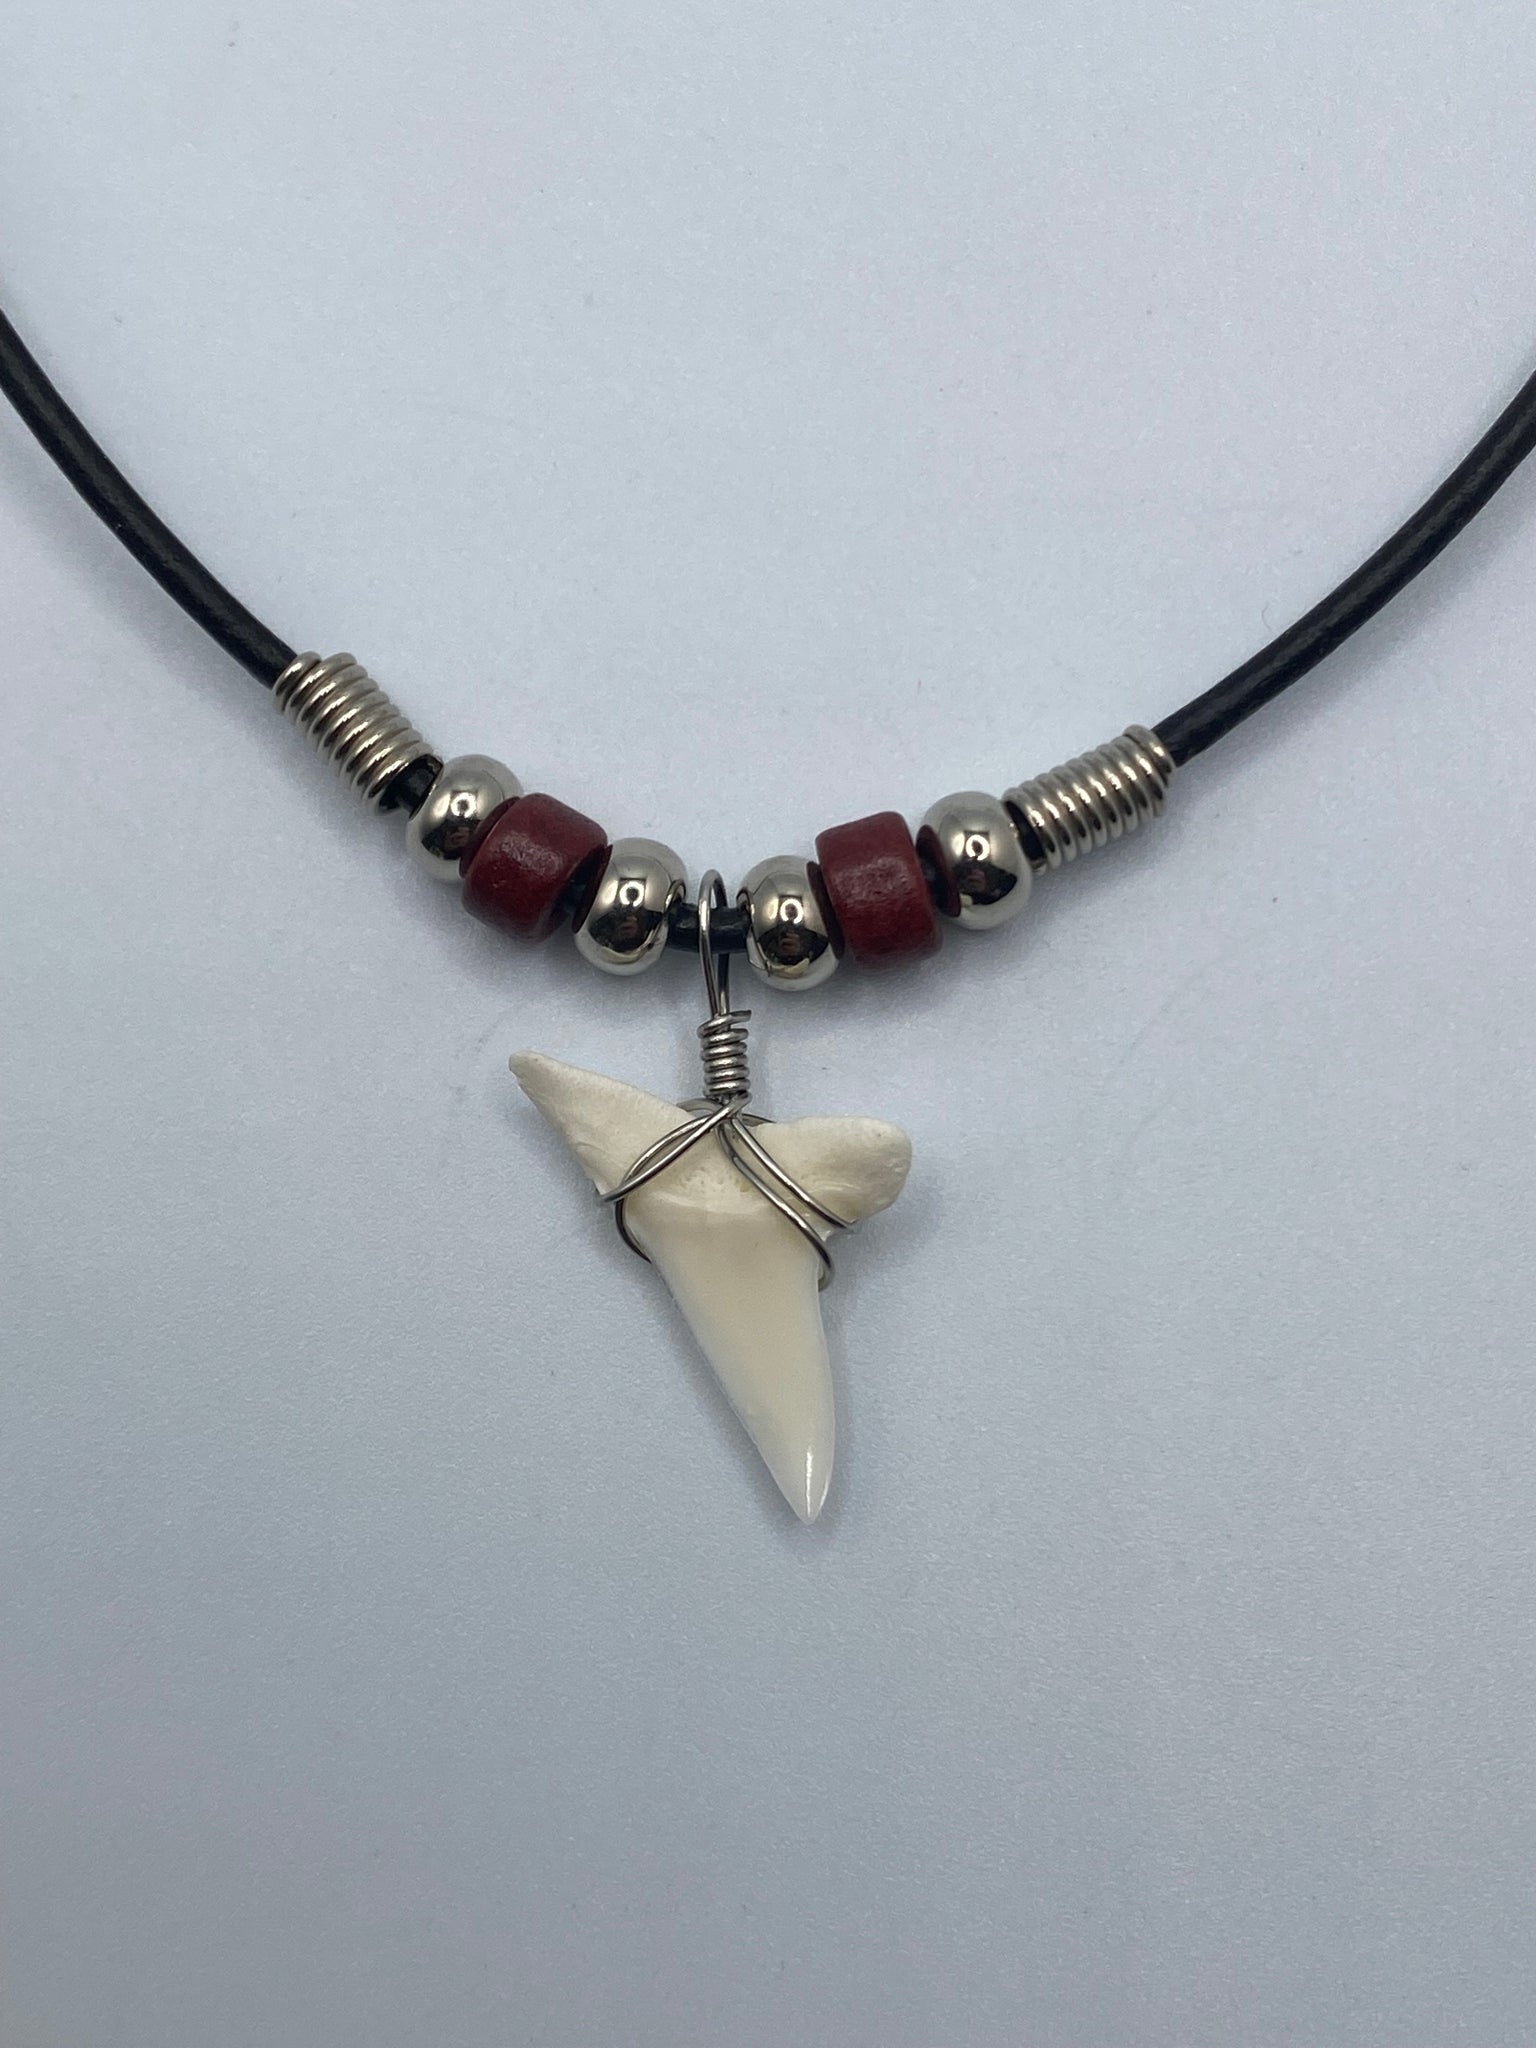 White Shark Tooth Necklace With Burgundy Beads – Real Shark Tooth Necklaces